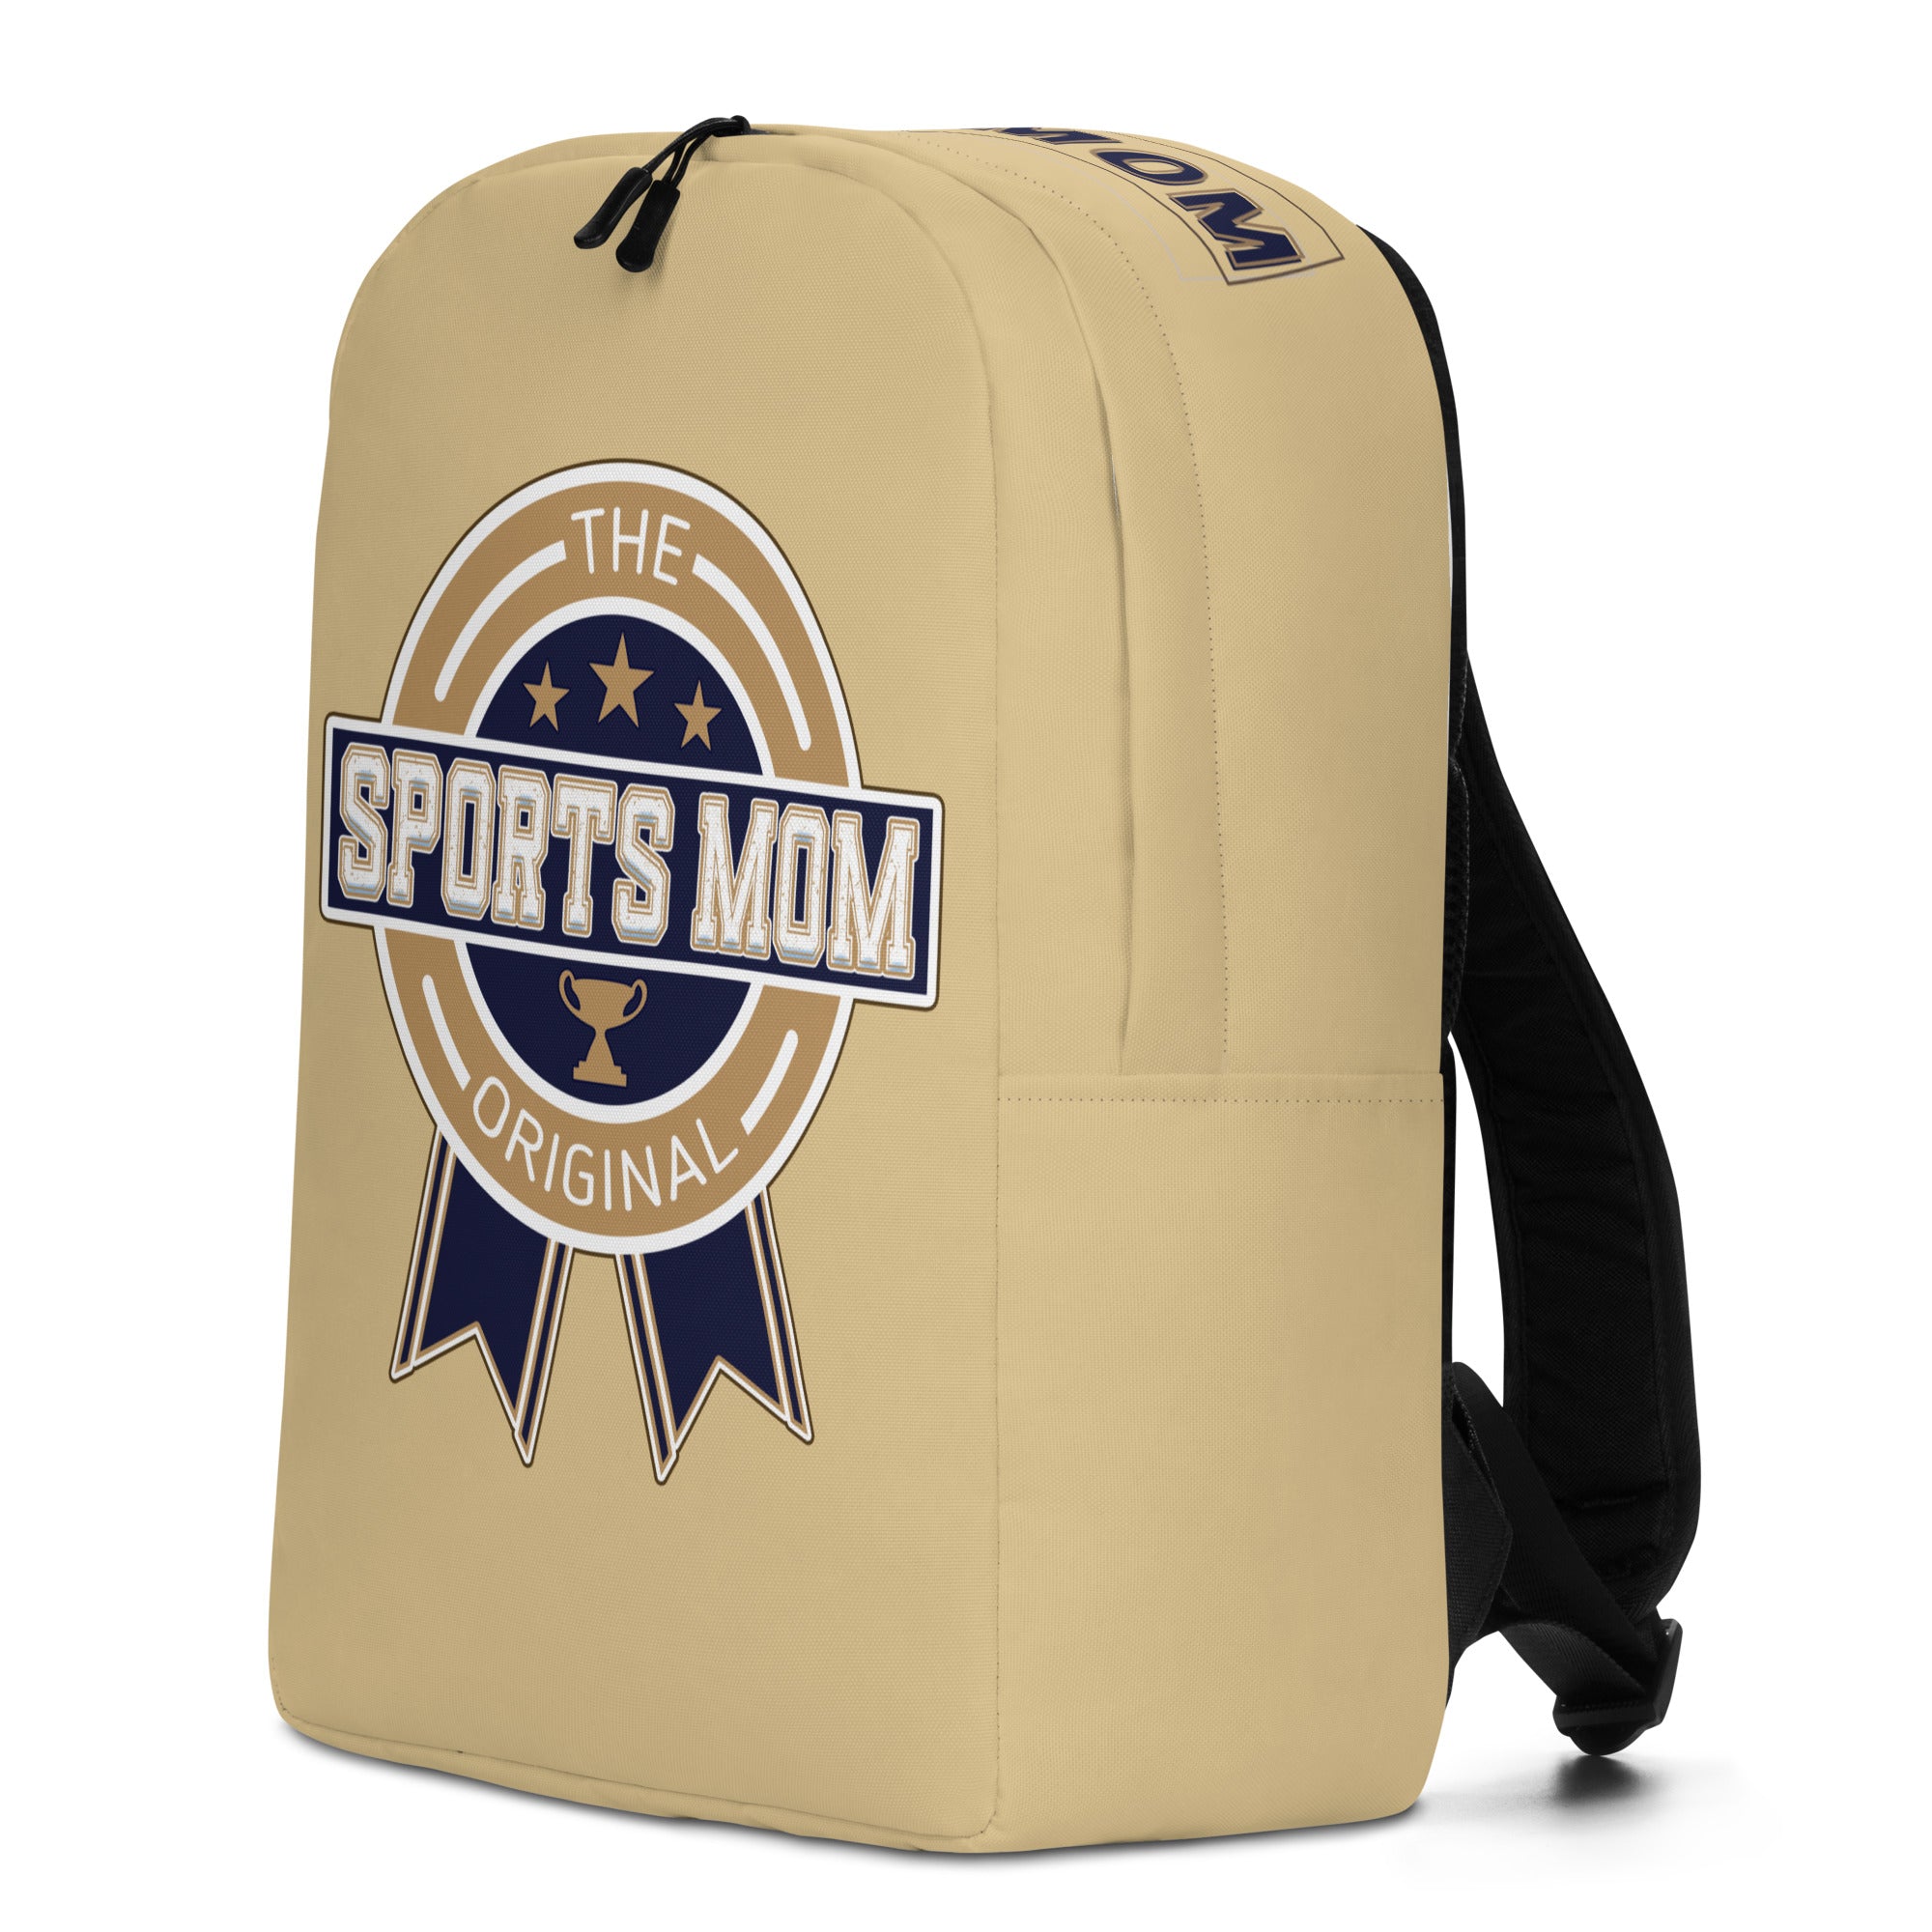 Sports Mom Minimalist Backpack - Away Game - New Orleans